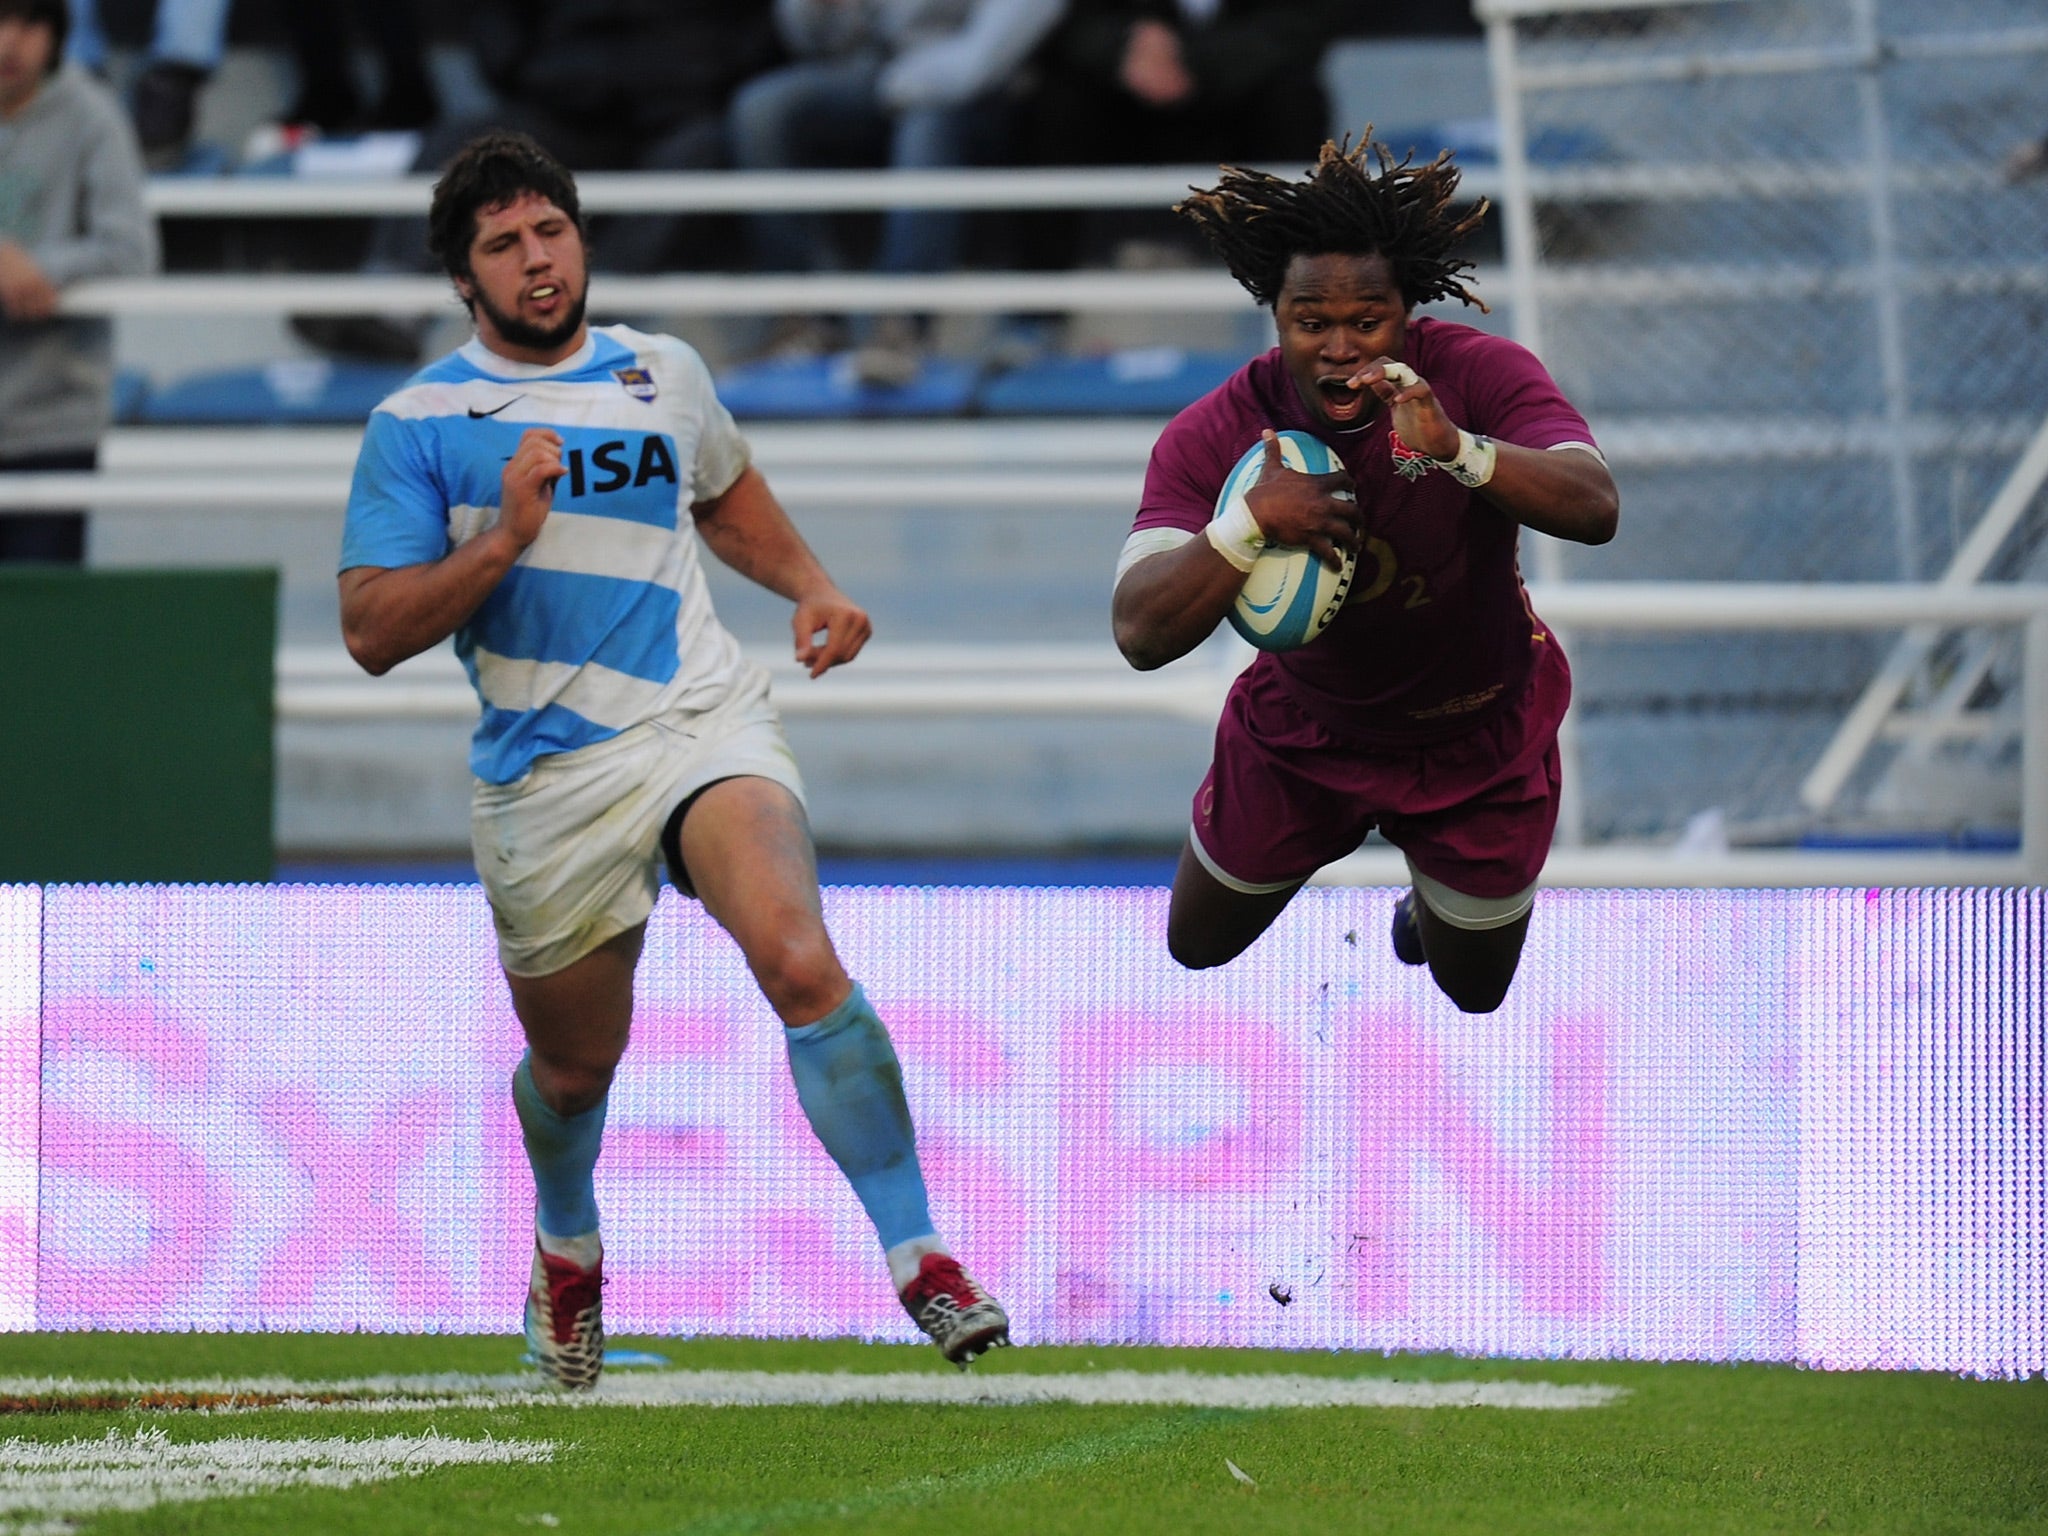 Marland Yarde scores a try for England against Argentina